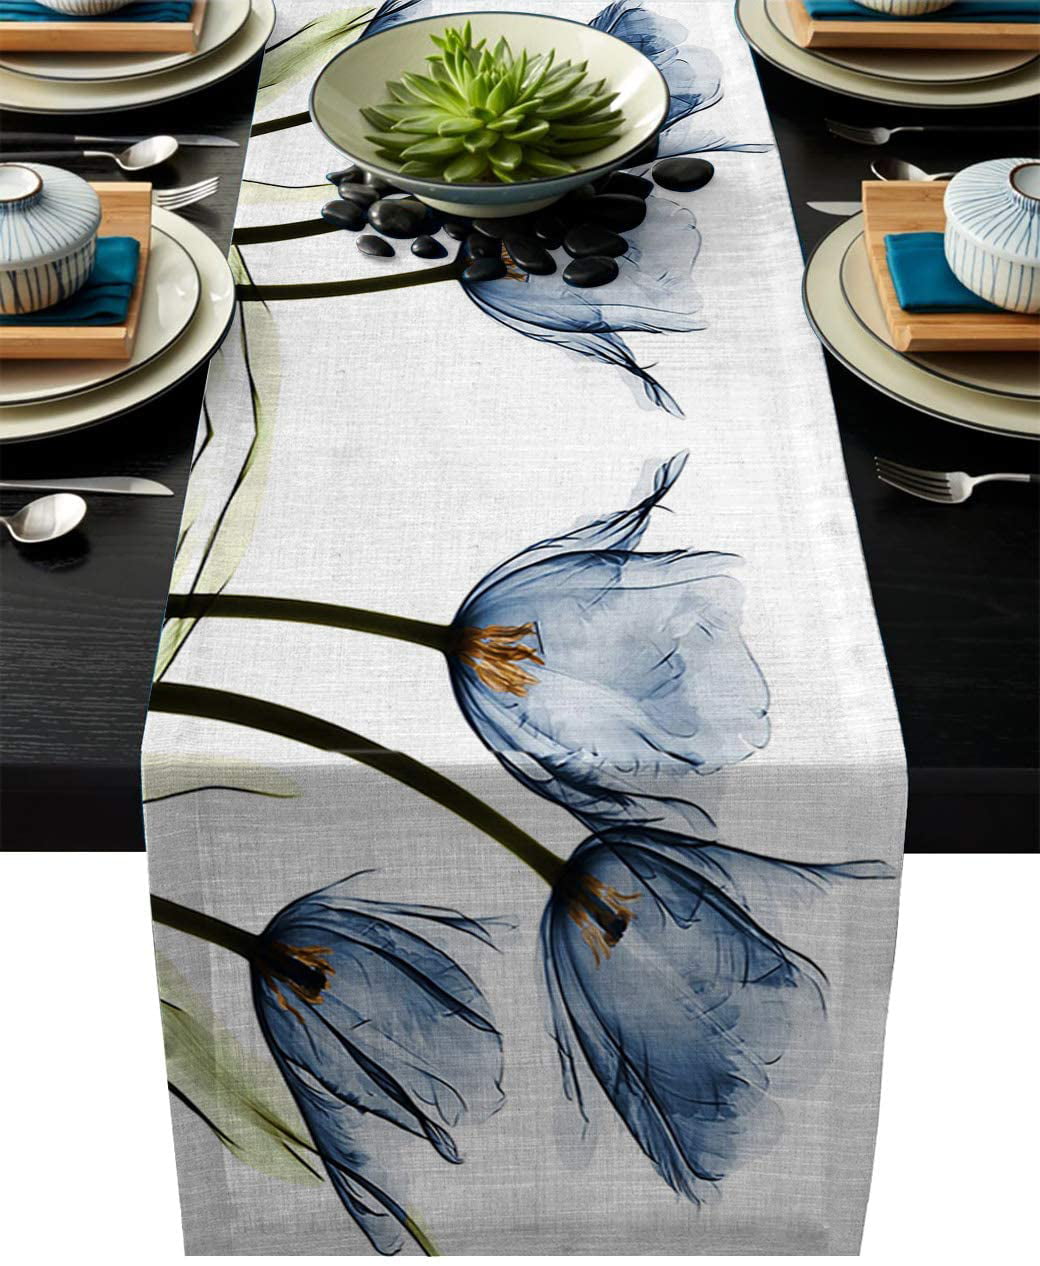 Indoor and Outdoor Festival Parties 13X90 Inch Table Runner Flower Peony Heat Resistant Dining Table Runner for Catering Events Dinner Parties Wedding